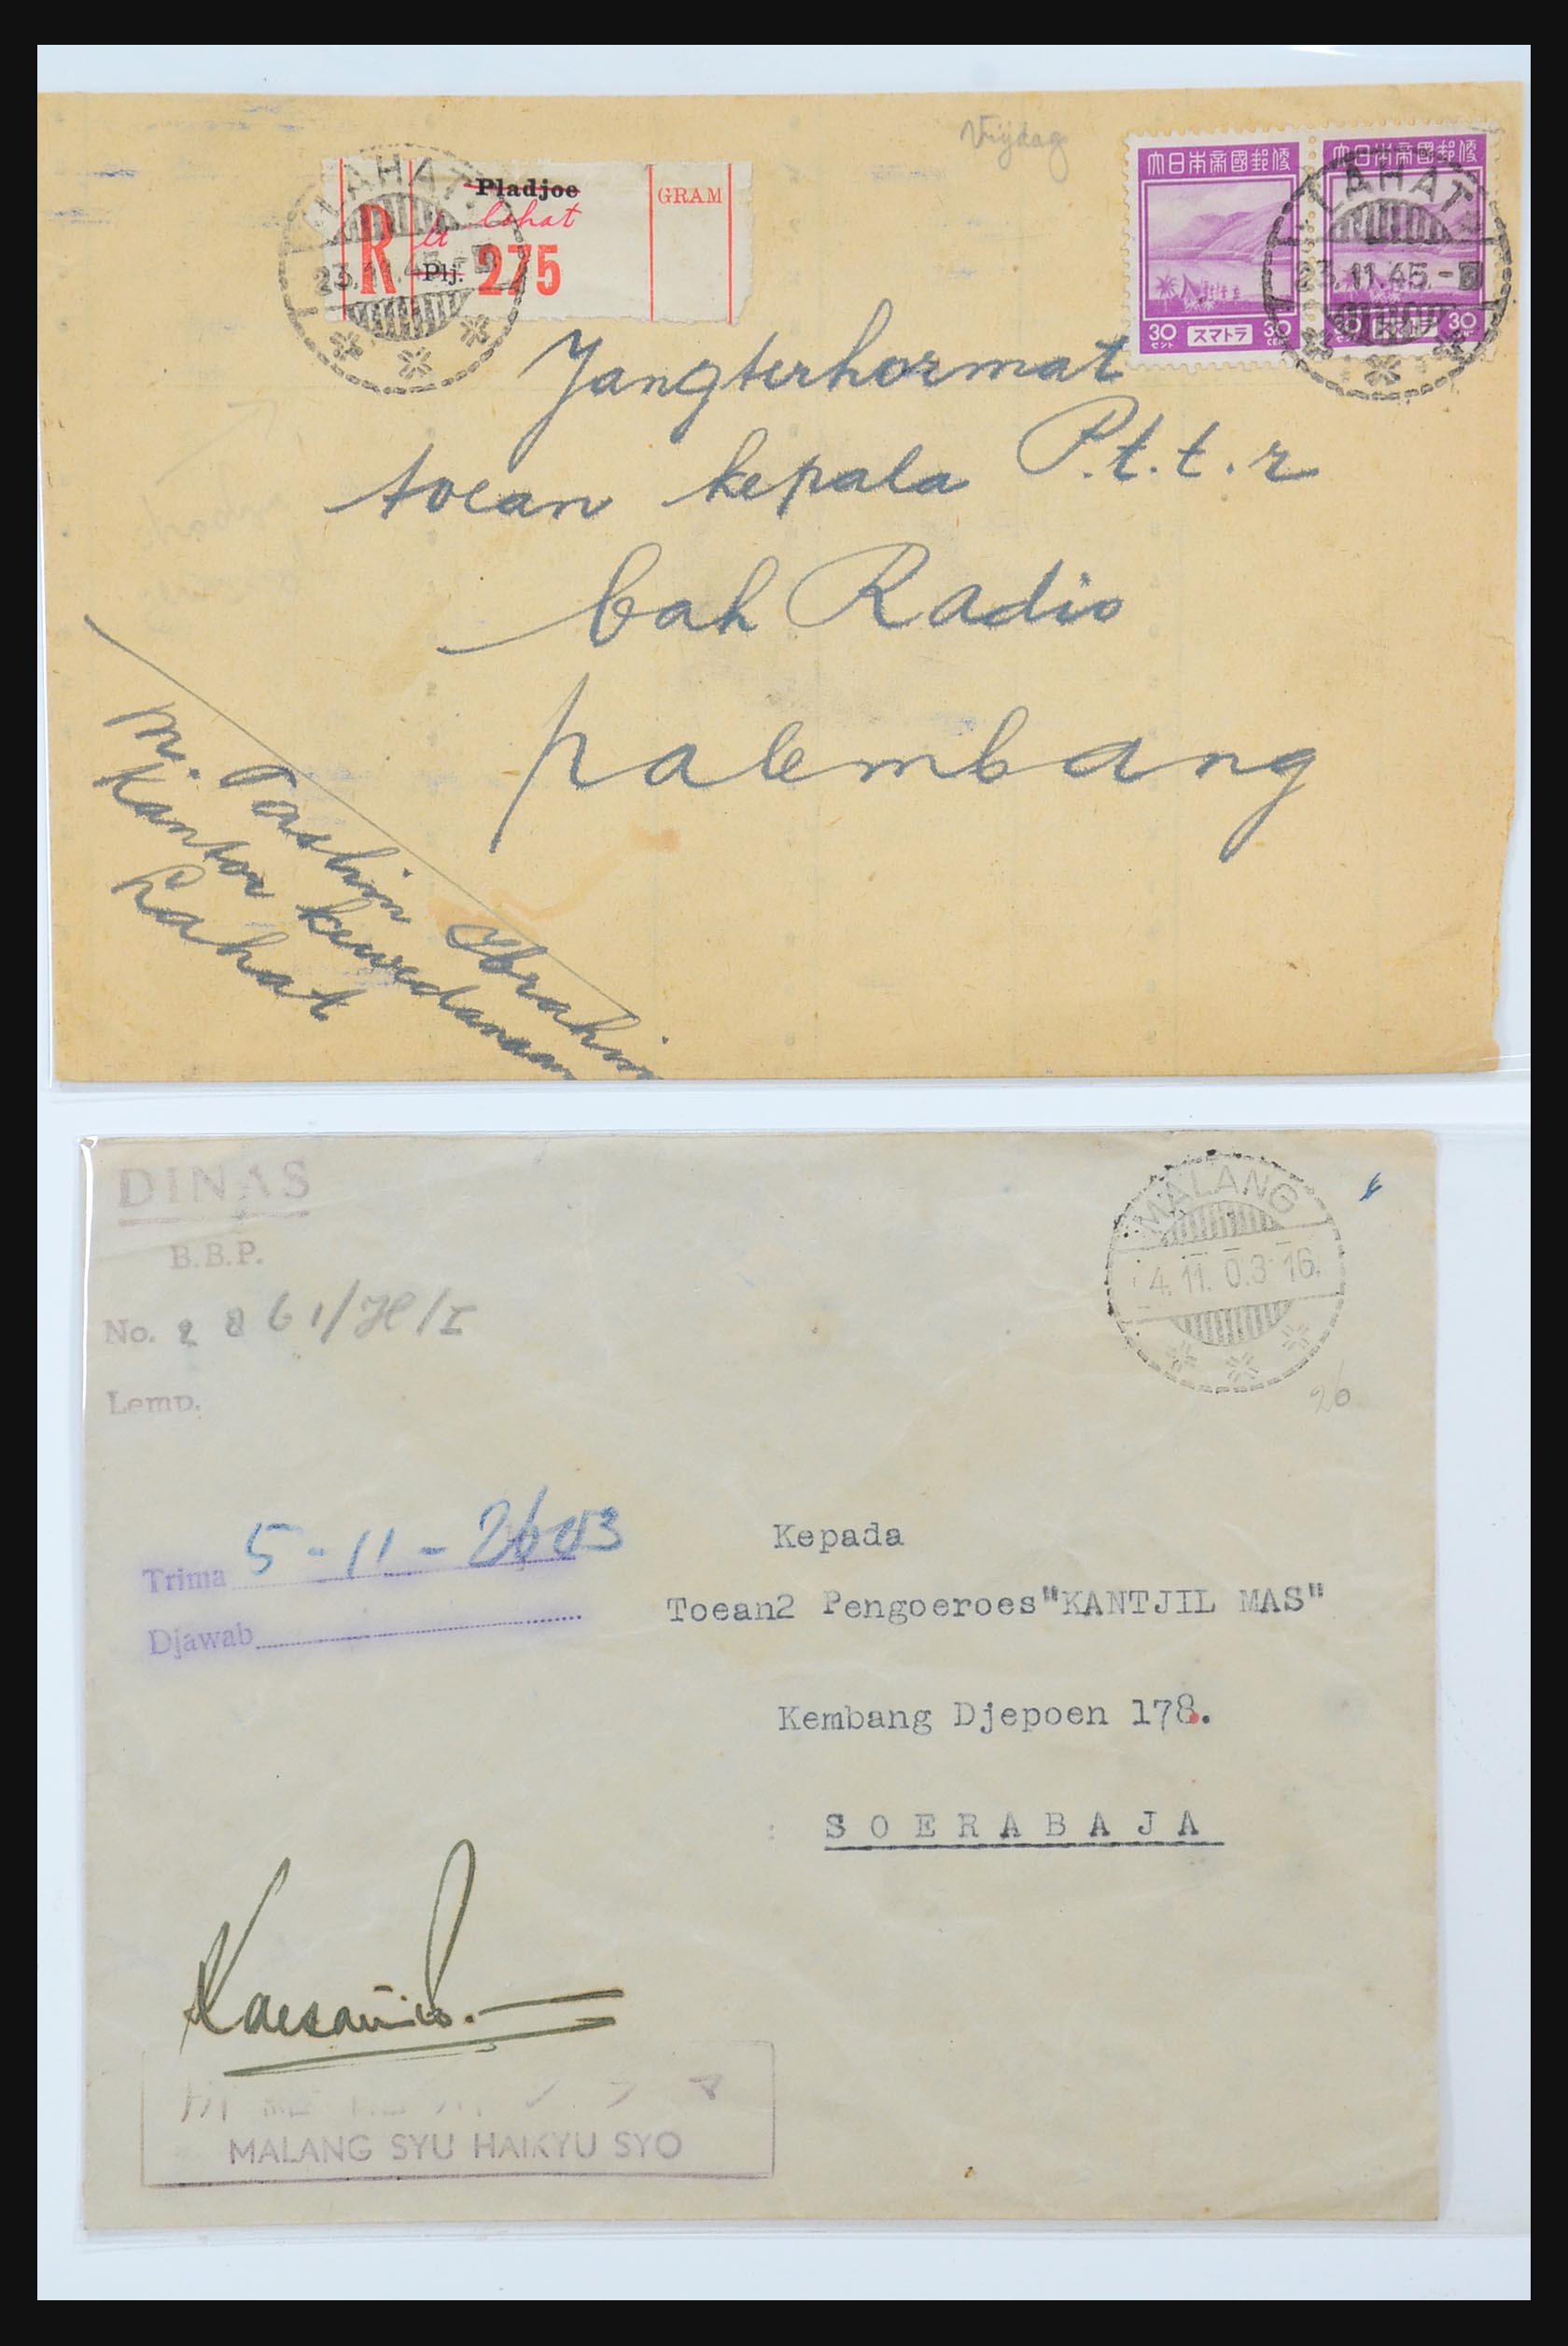 31362 127 - 31362 Netherlands Indies Japanese occupation covers 1942-1945.